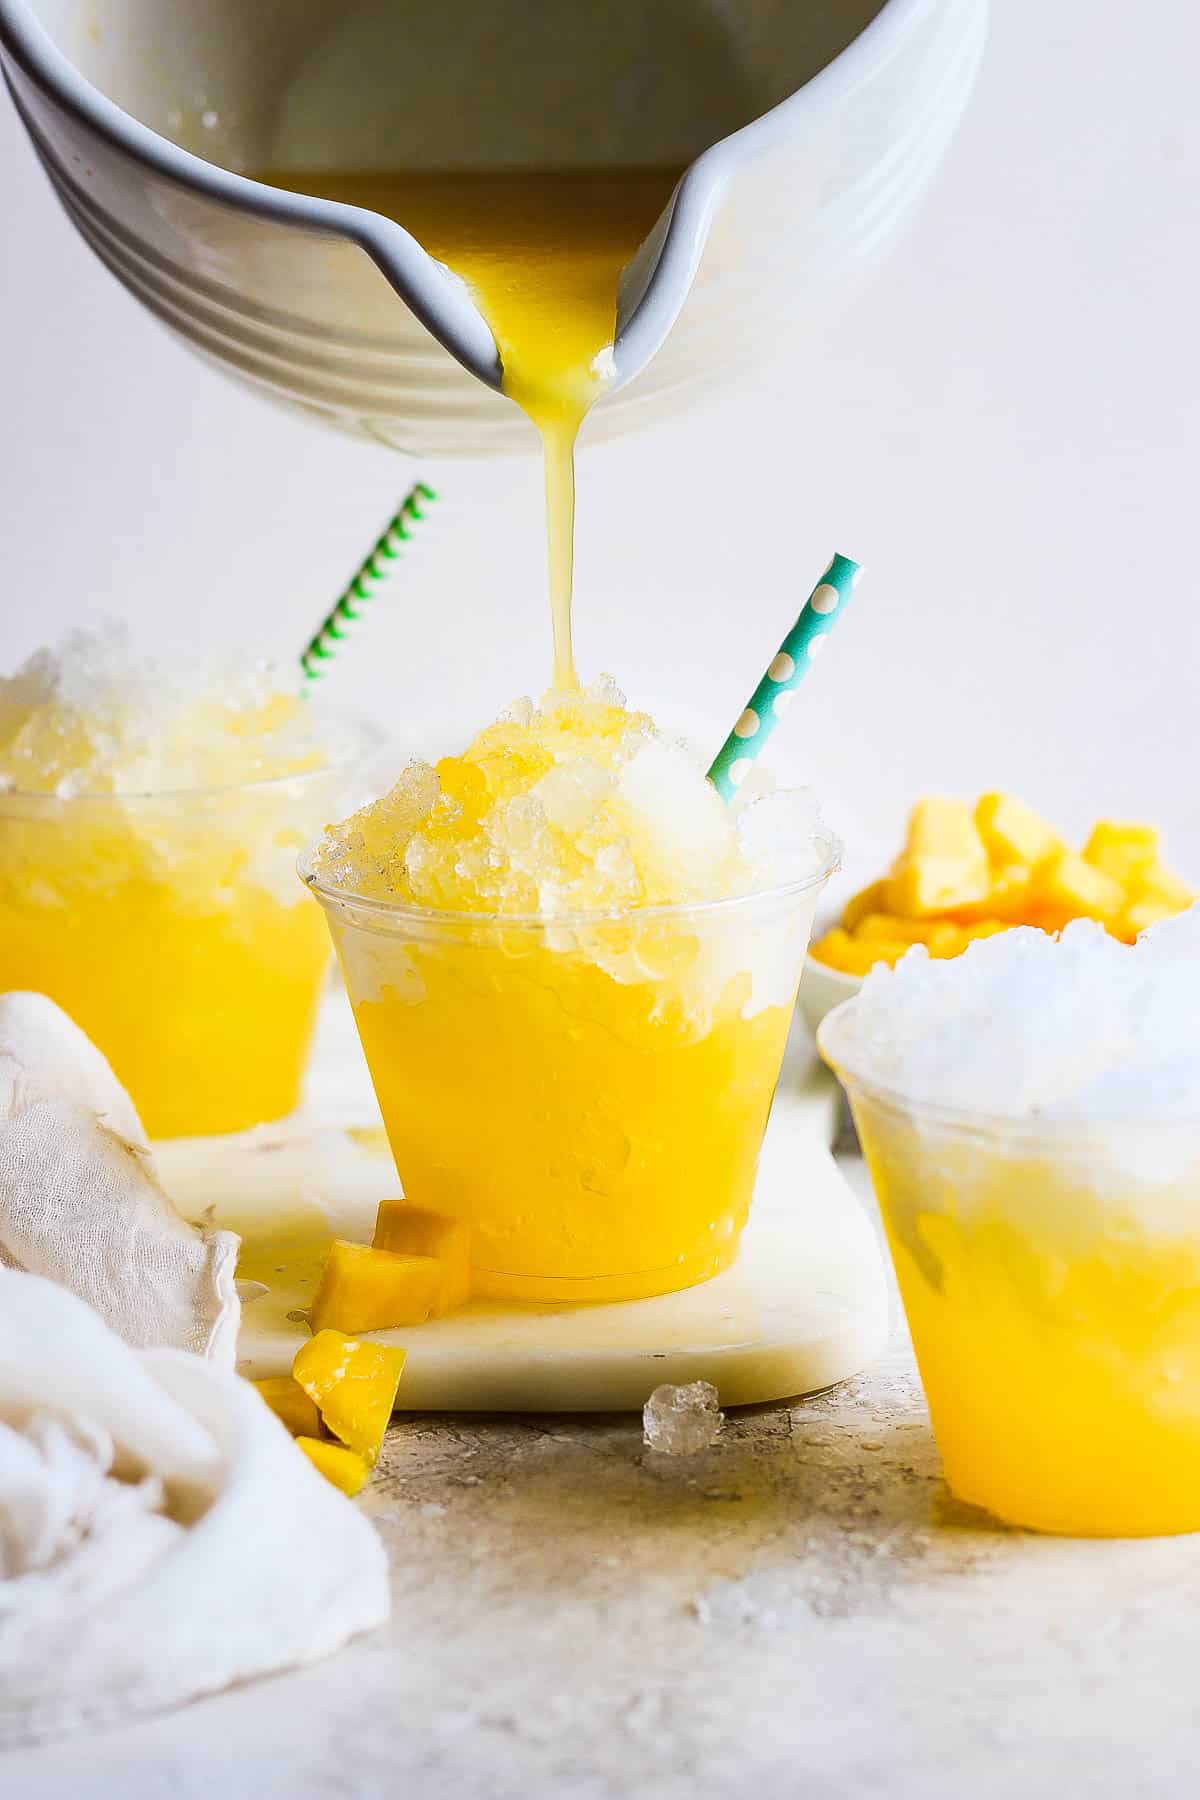 Raspados in a plastic cup with mango syrup being poured on top